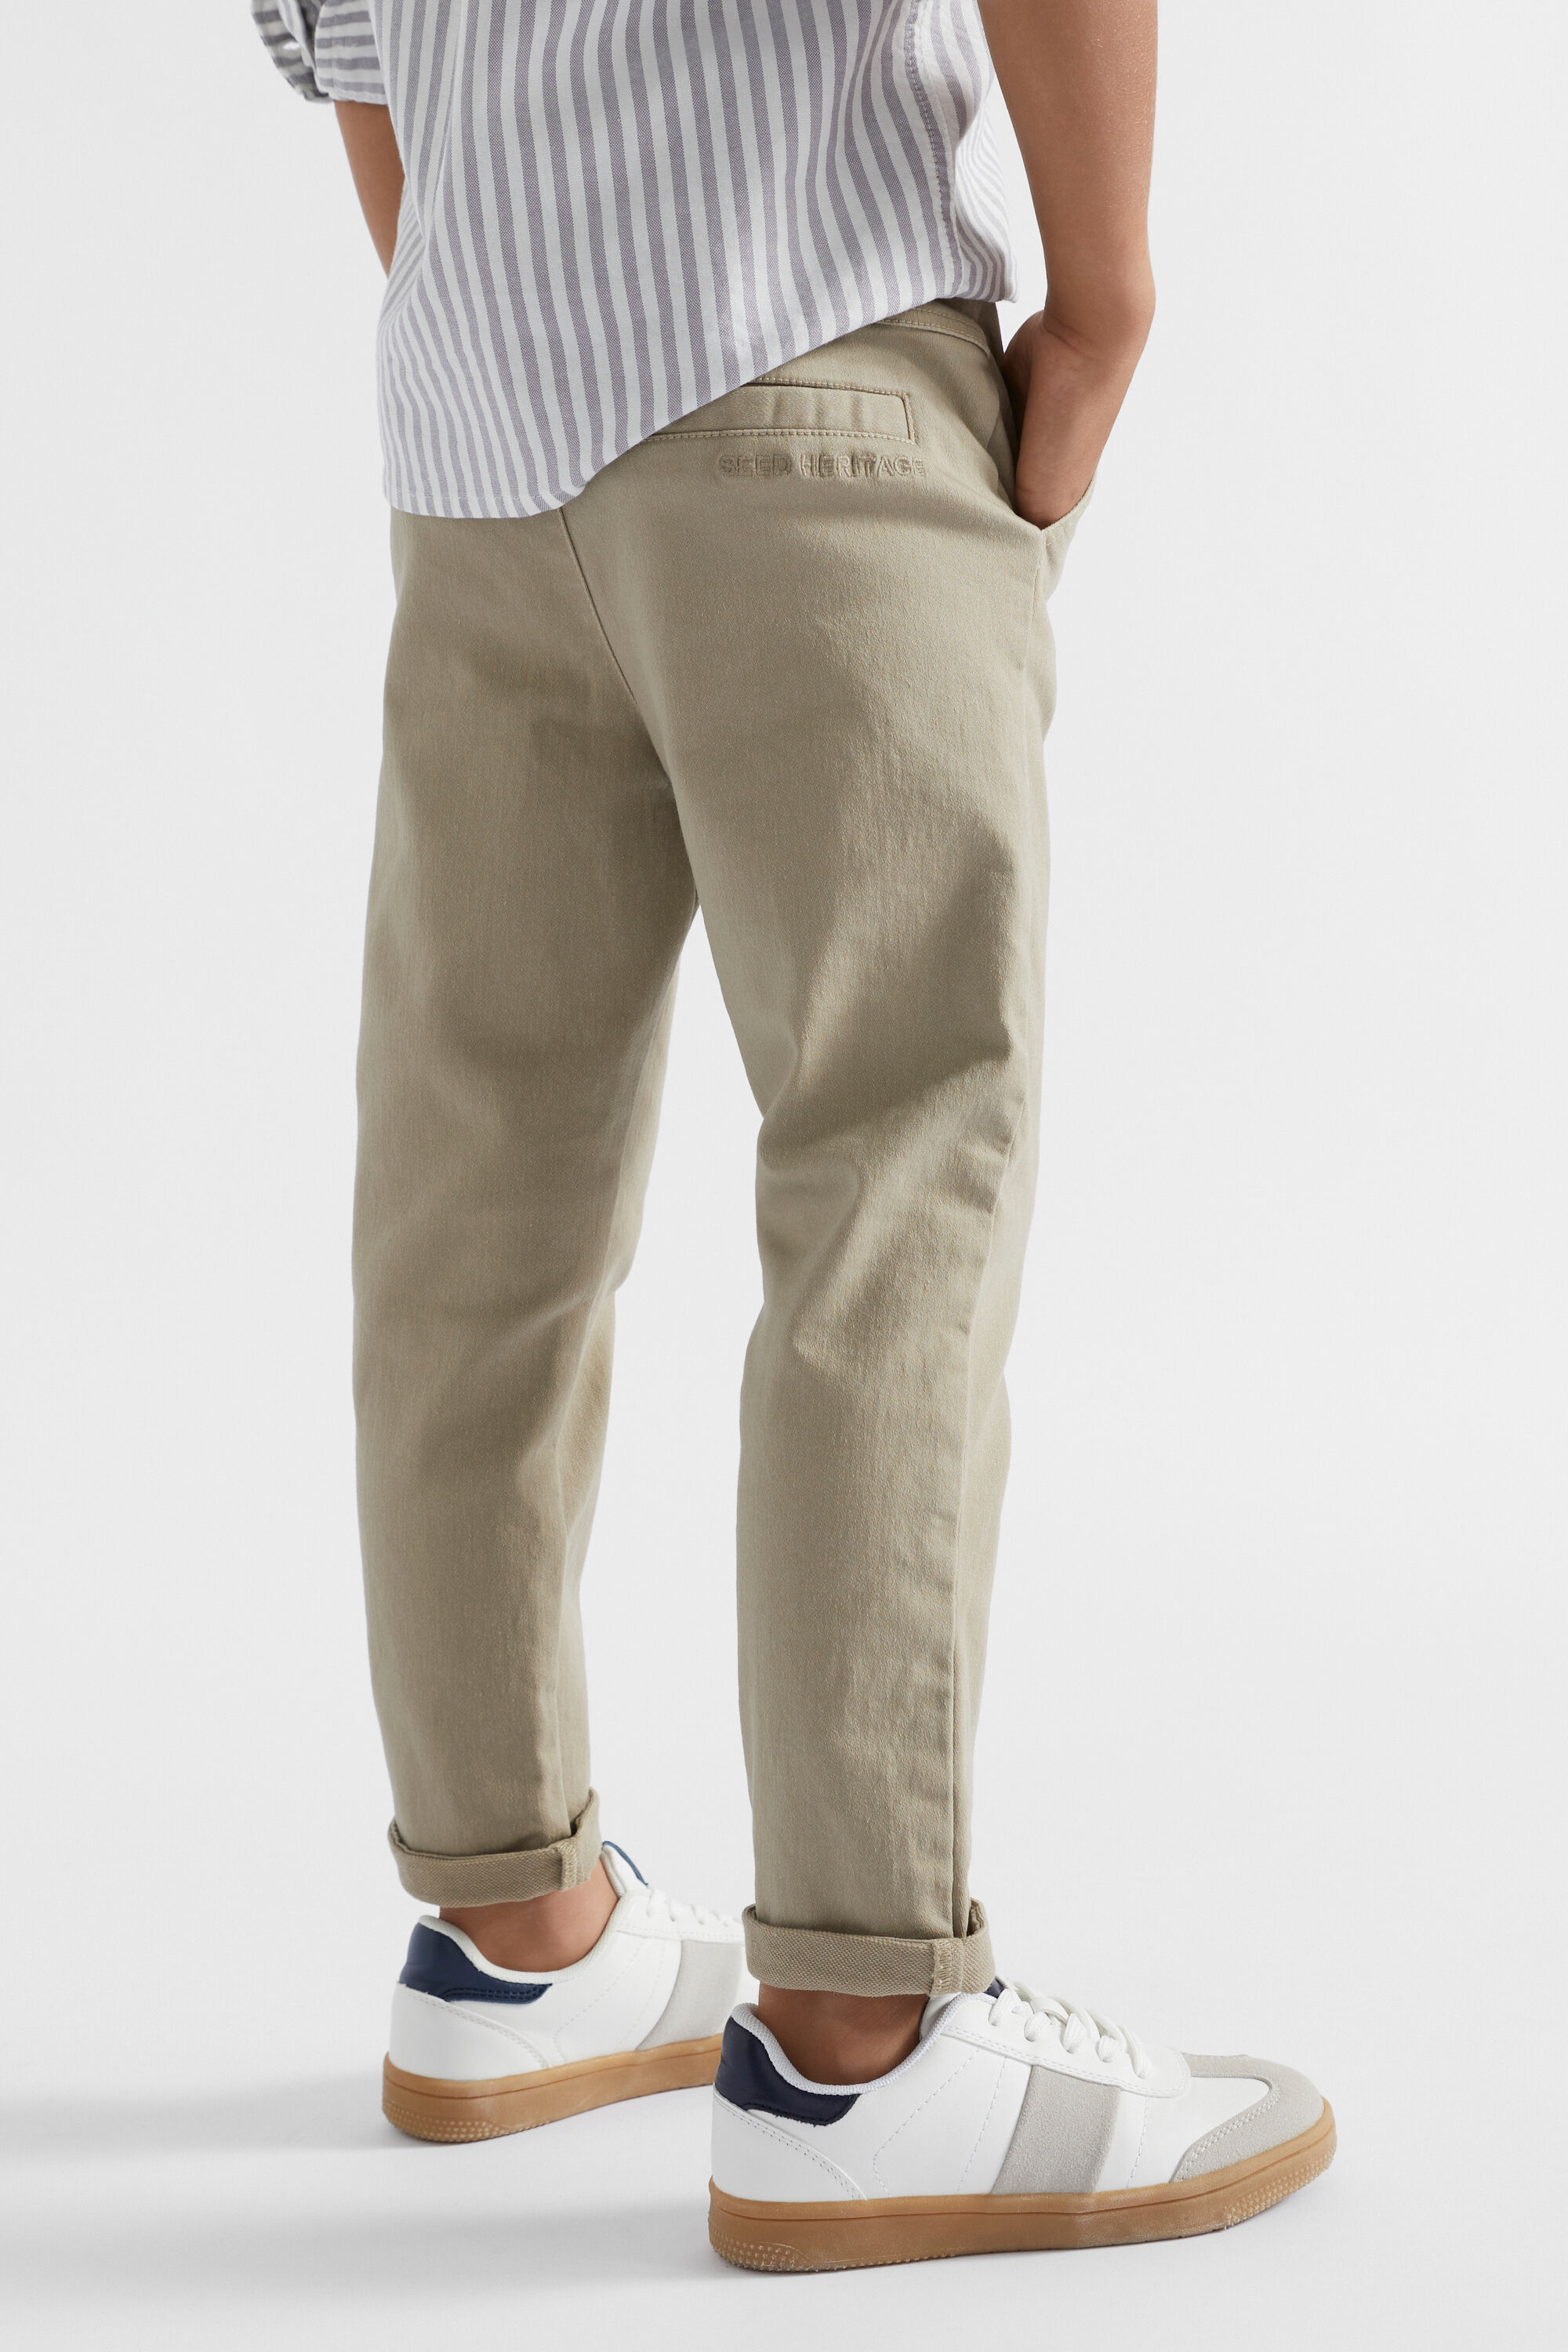 Model Wearing Brown Cargo Pants Or Cargo Trousers With White Sneakers  High-Res Stock Photo - Getty Images